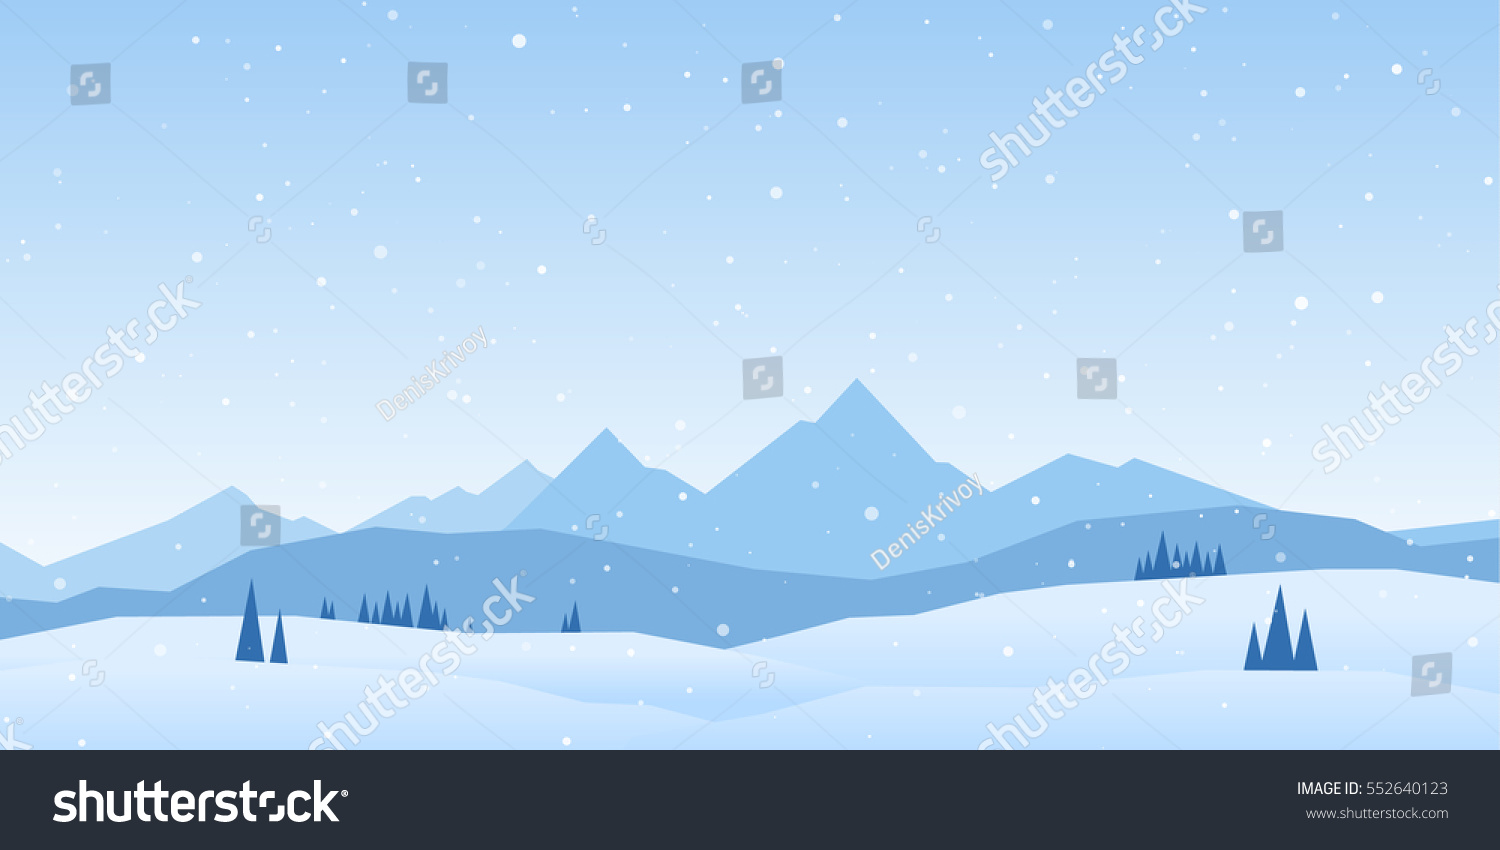 Vector illustration: Winter Mountains landscape with pines and hills. #552640123